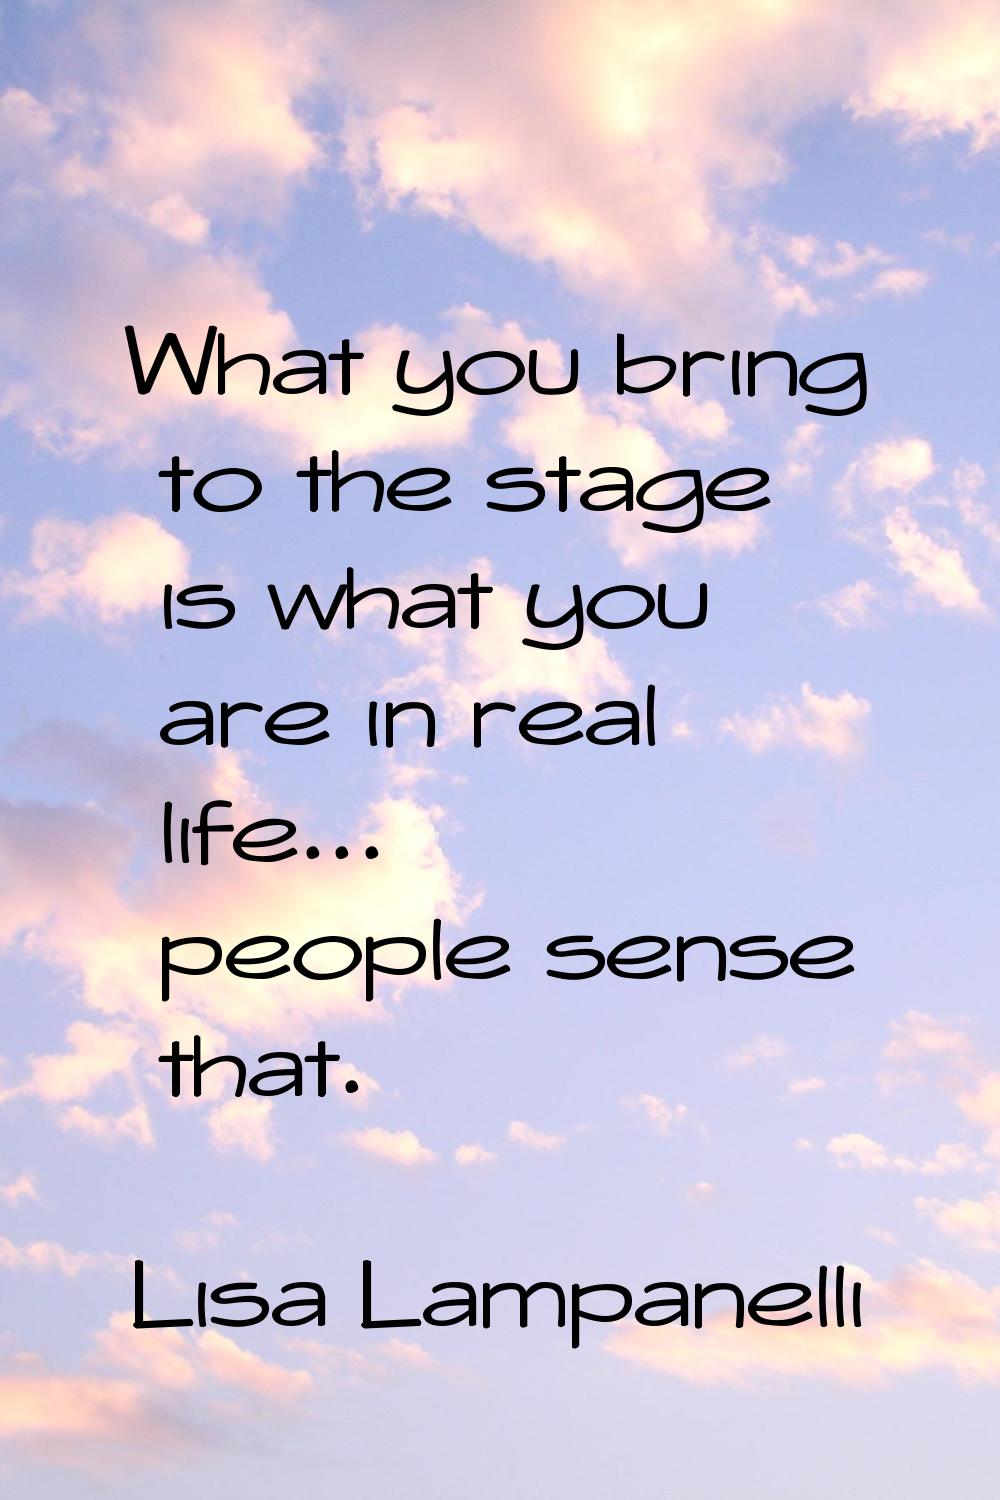 What you bring to the stage is what you are in real life... people sense that.